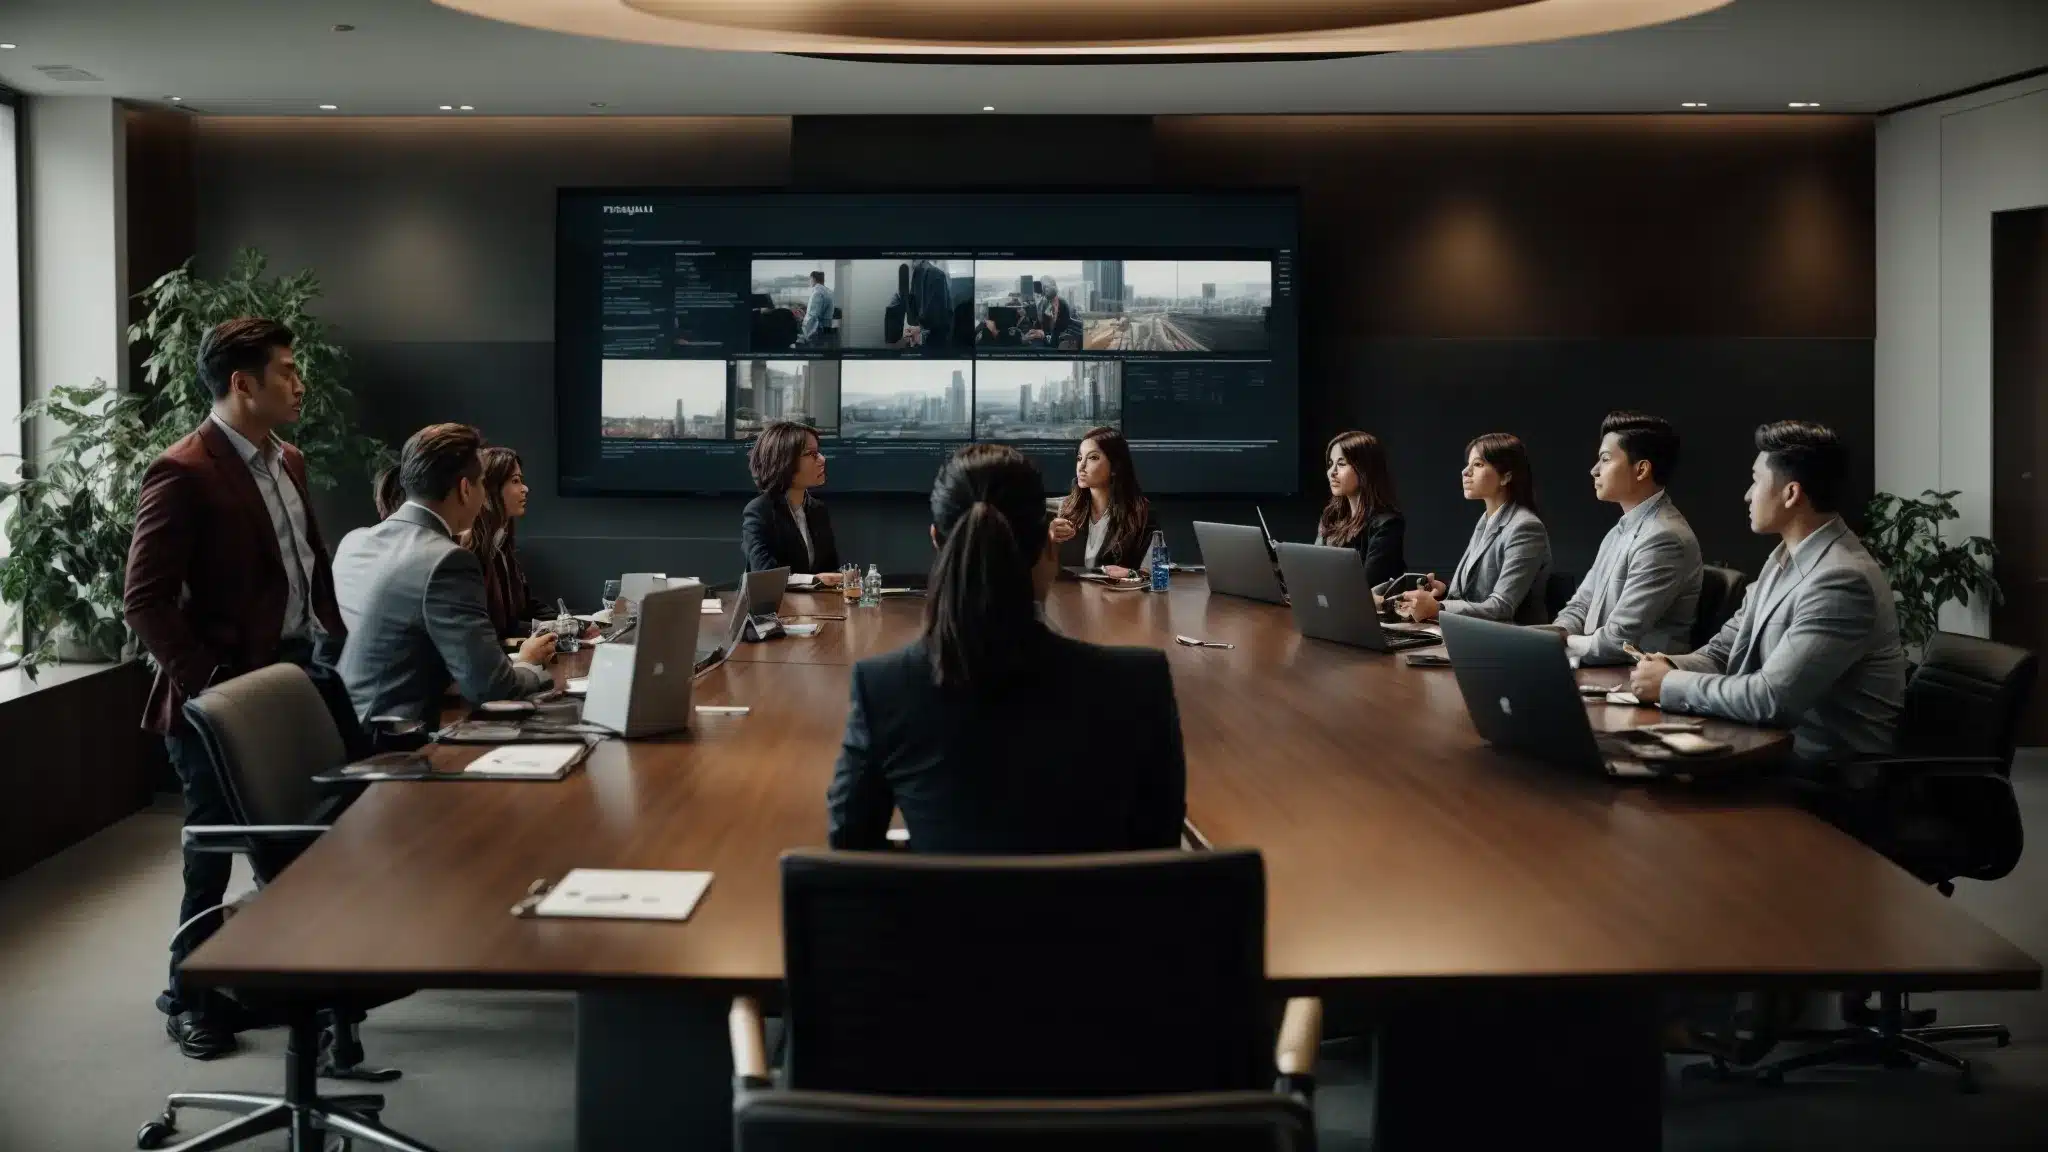 A Team Of Professionals Gathers Around A Conference Table, Strategizing Over A Digital Content Plan Displayed On A Large Screen.